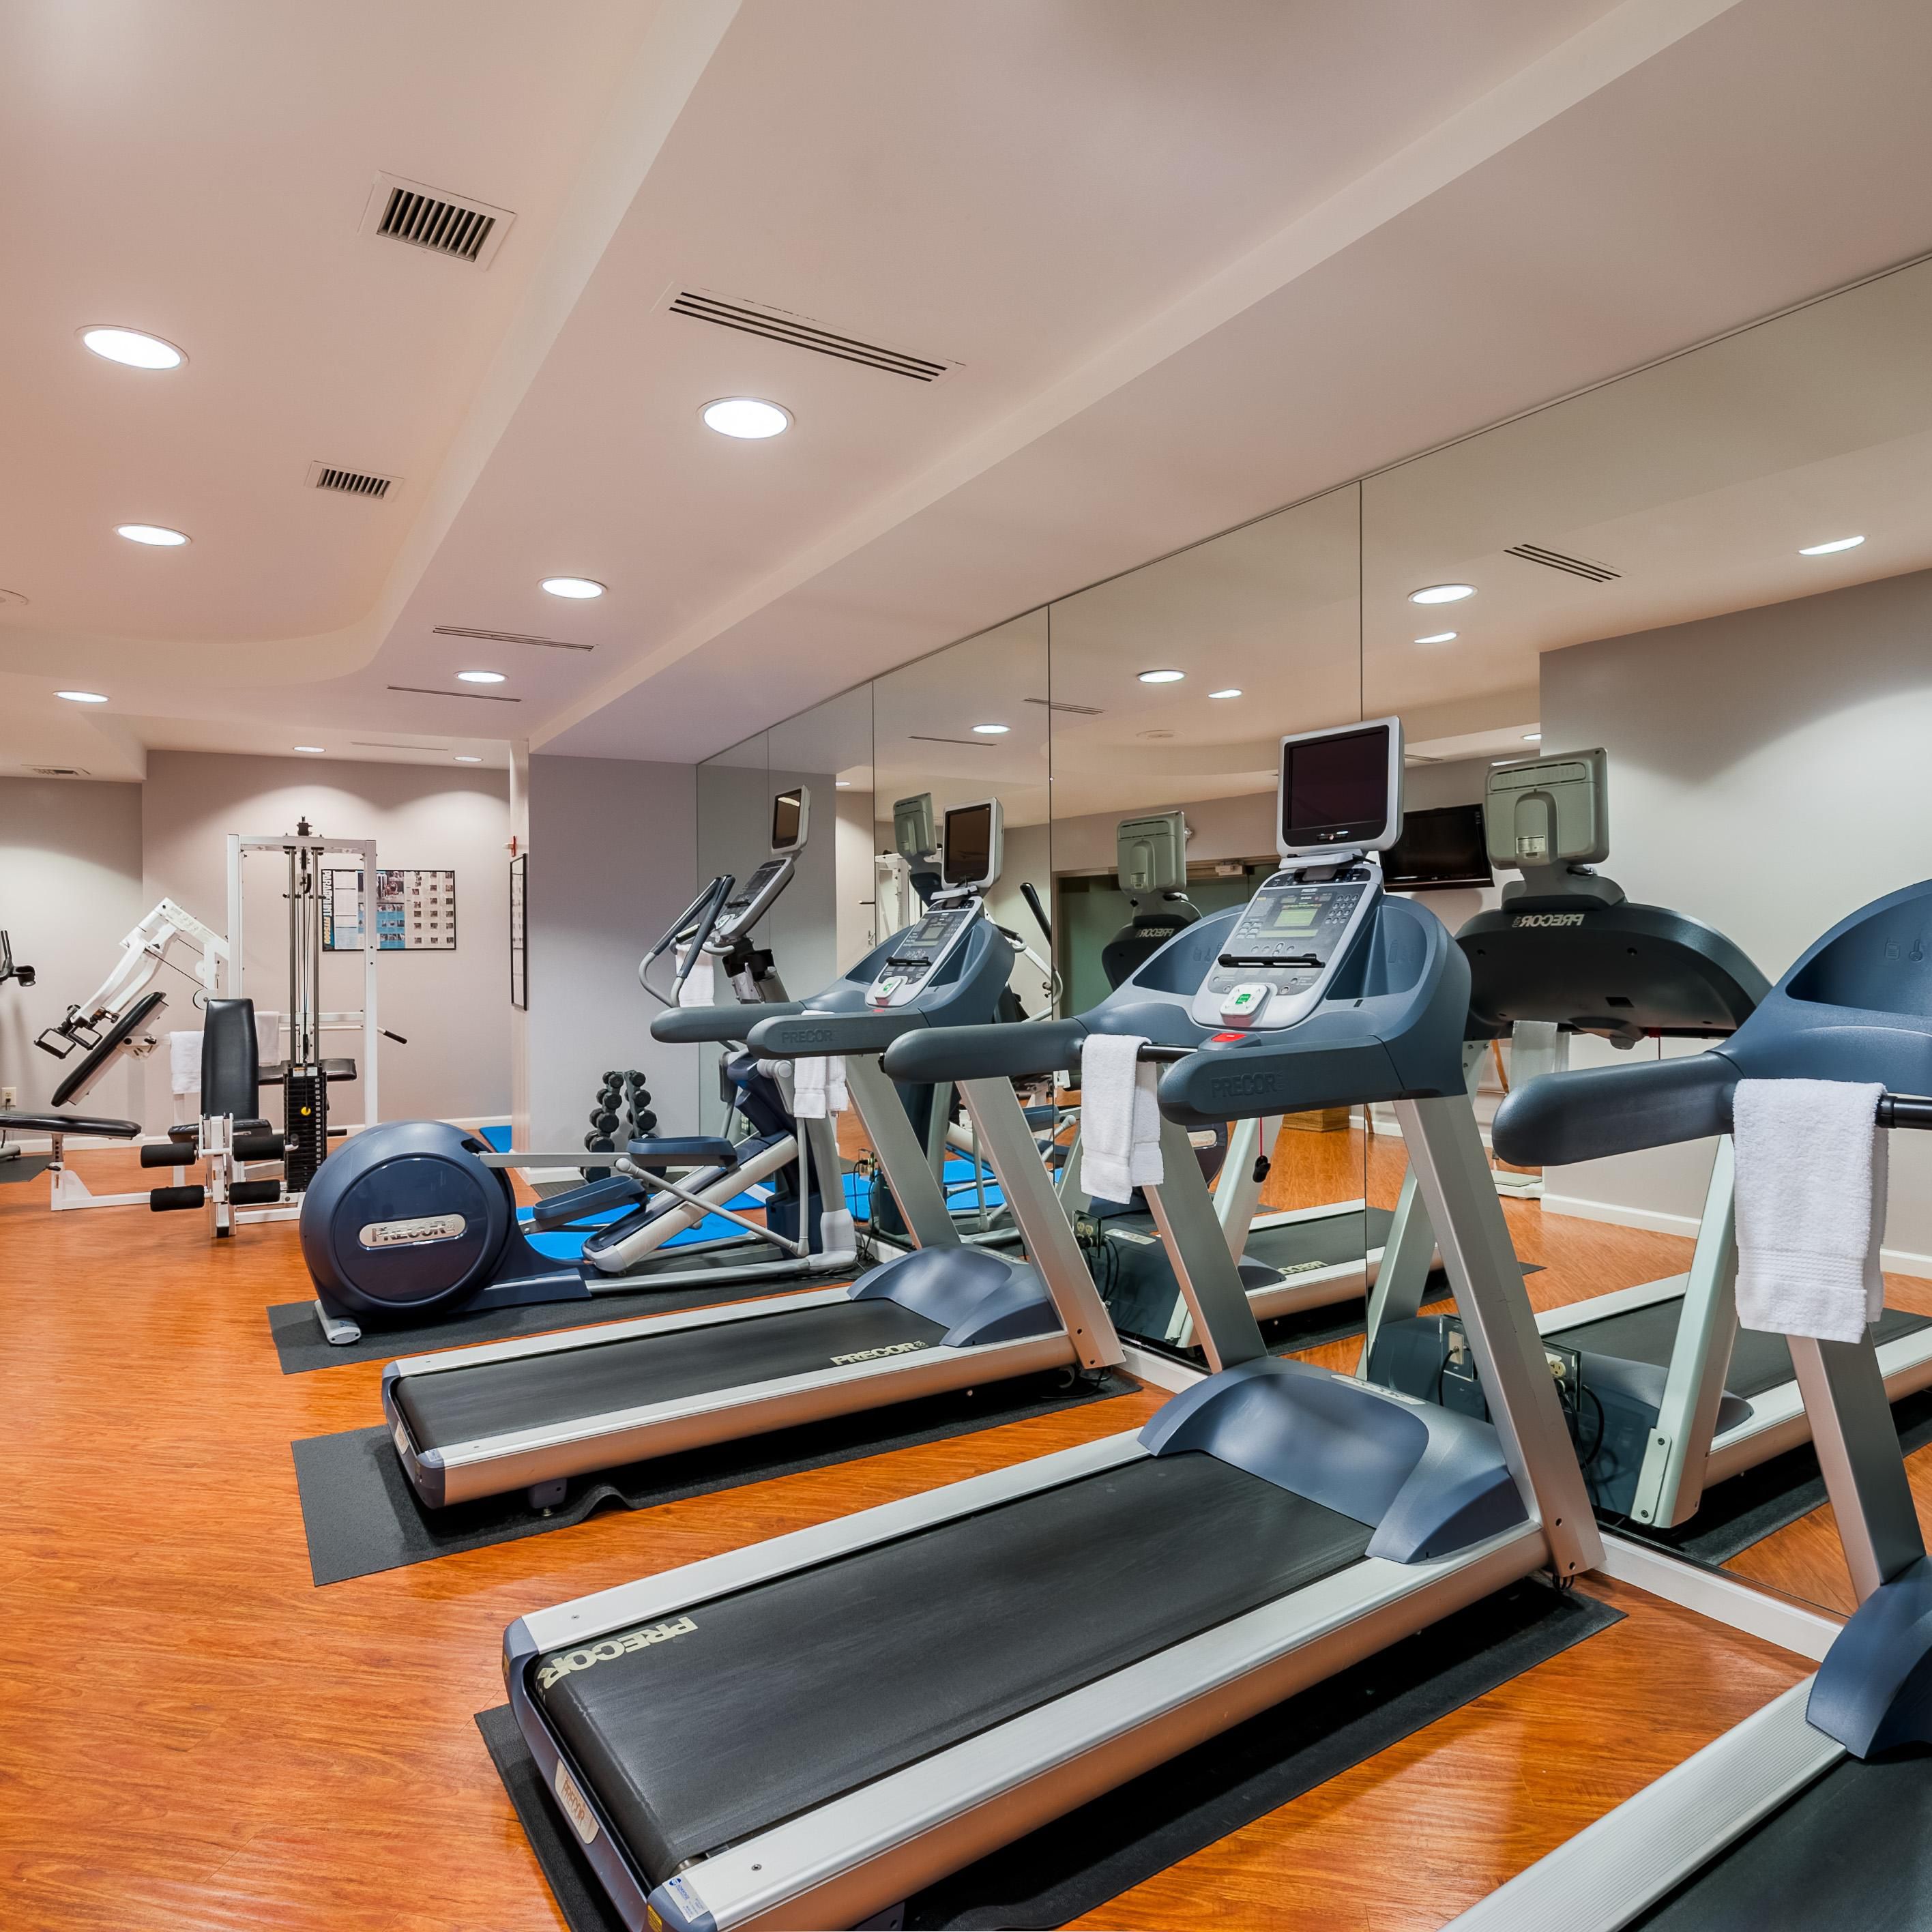 Enjoy a vigorous workout in our fully equipped fitness center